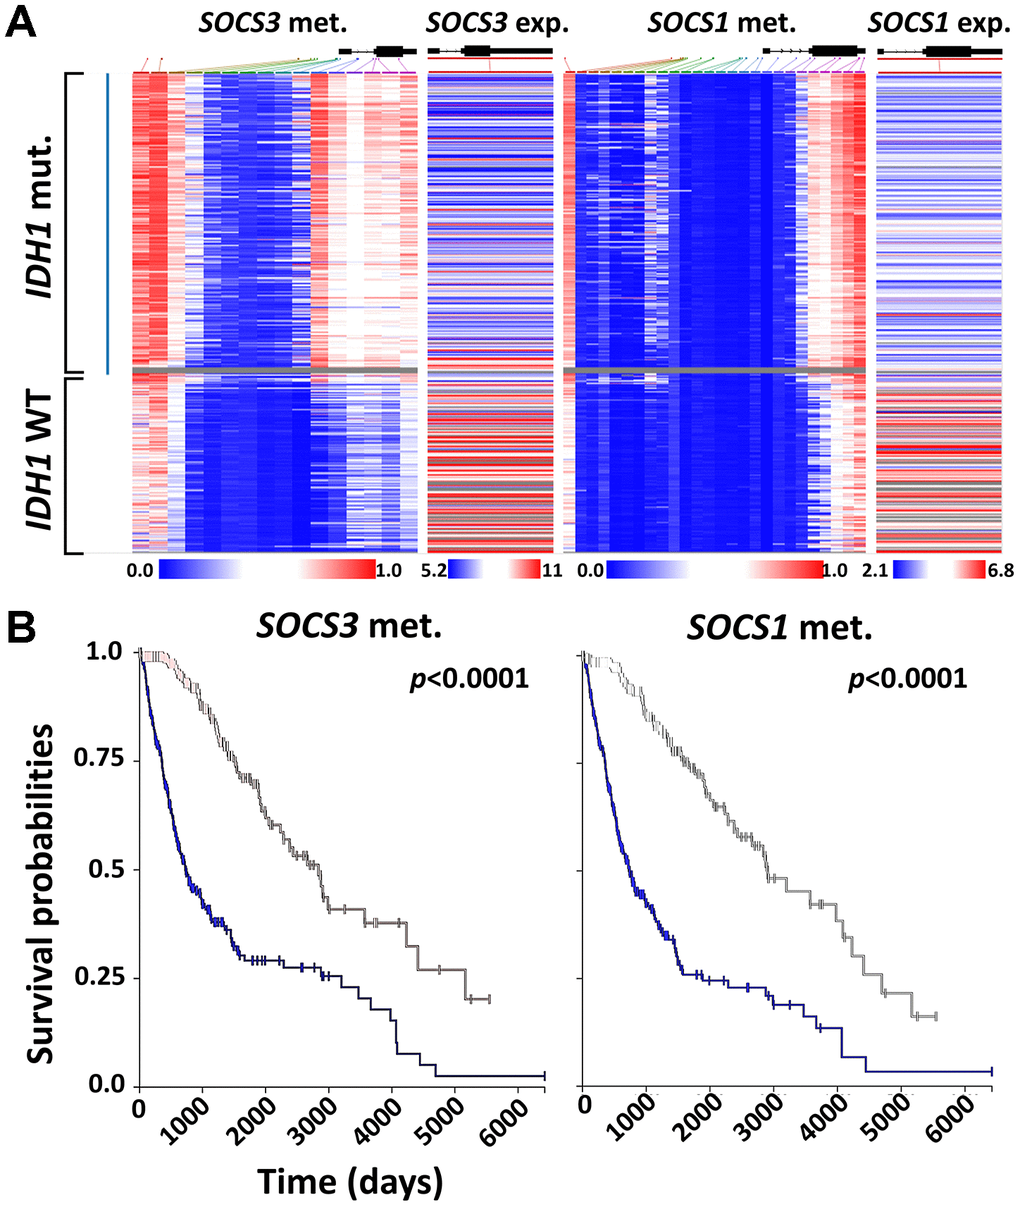 Correlation between SOCS1 and SOCS3 expression and IDH1 mutation. (A) Heatmap analysis of SOCS1 and SOCS3 gene expression, methylation and IDH1 mutation status was achieved using UCSC Xena and TCGA-LGG/GBM datasets (N = 658). The gray area indicates that SOCS3 methylation data is not available for that specific patient’s sample. (B) K-M survival analysis of LGG and GBM patients based on the methylation status of SOCS1 and SOCS3. Blue lines indicate the groups with lower-than-median methylation of SOCS1 and SOCS3.